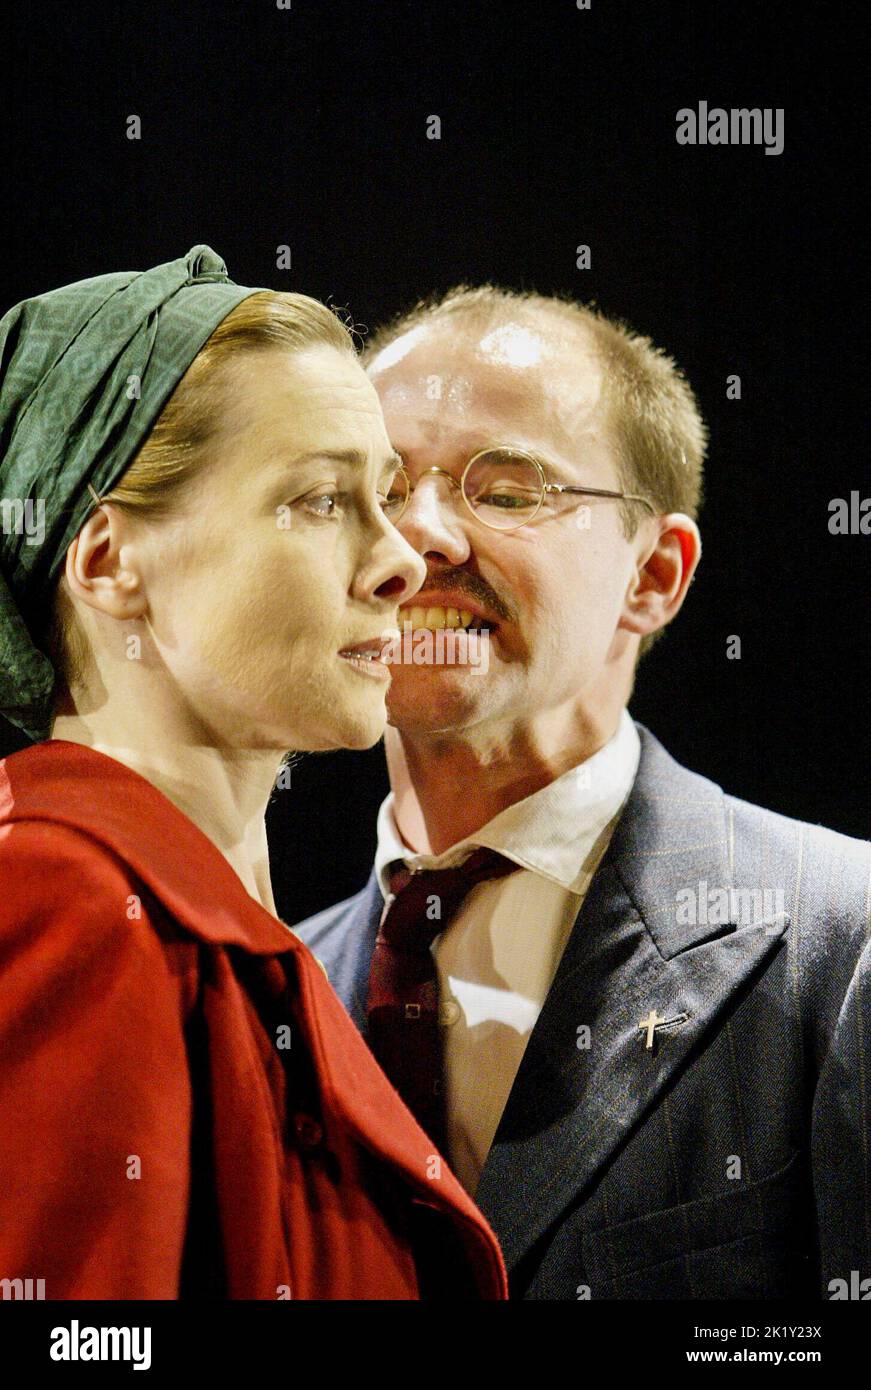 Emma Fielding (Isabella), Daniel Evans (Angelo) in MEASURE FOR MEASURE by Shakespeare at the Royal Shakespeare Company (RSC), Royal Shakespeare Theatre, Stratford-upon-Avon, Inghilterra 02/05/2003 design: Anthony Lamble Lighting: Tim Mitchell regista: Sean Holmes Foto Stock